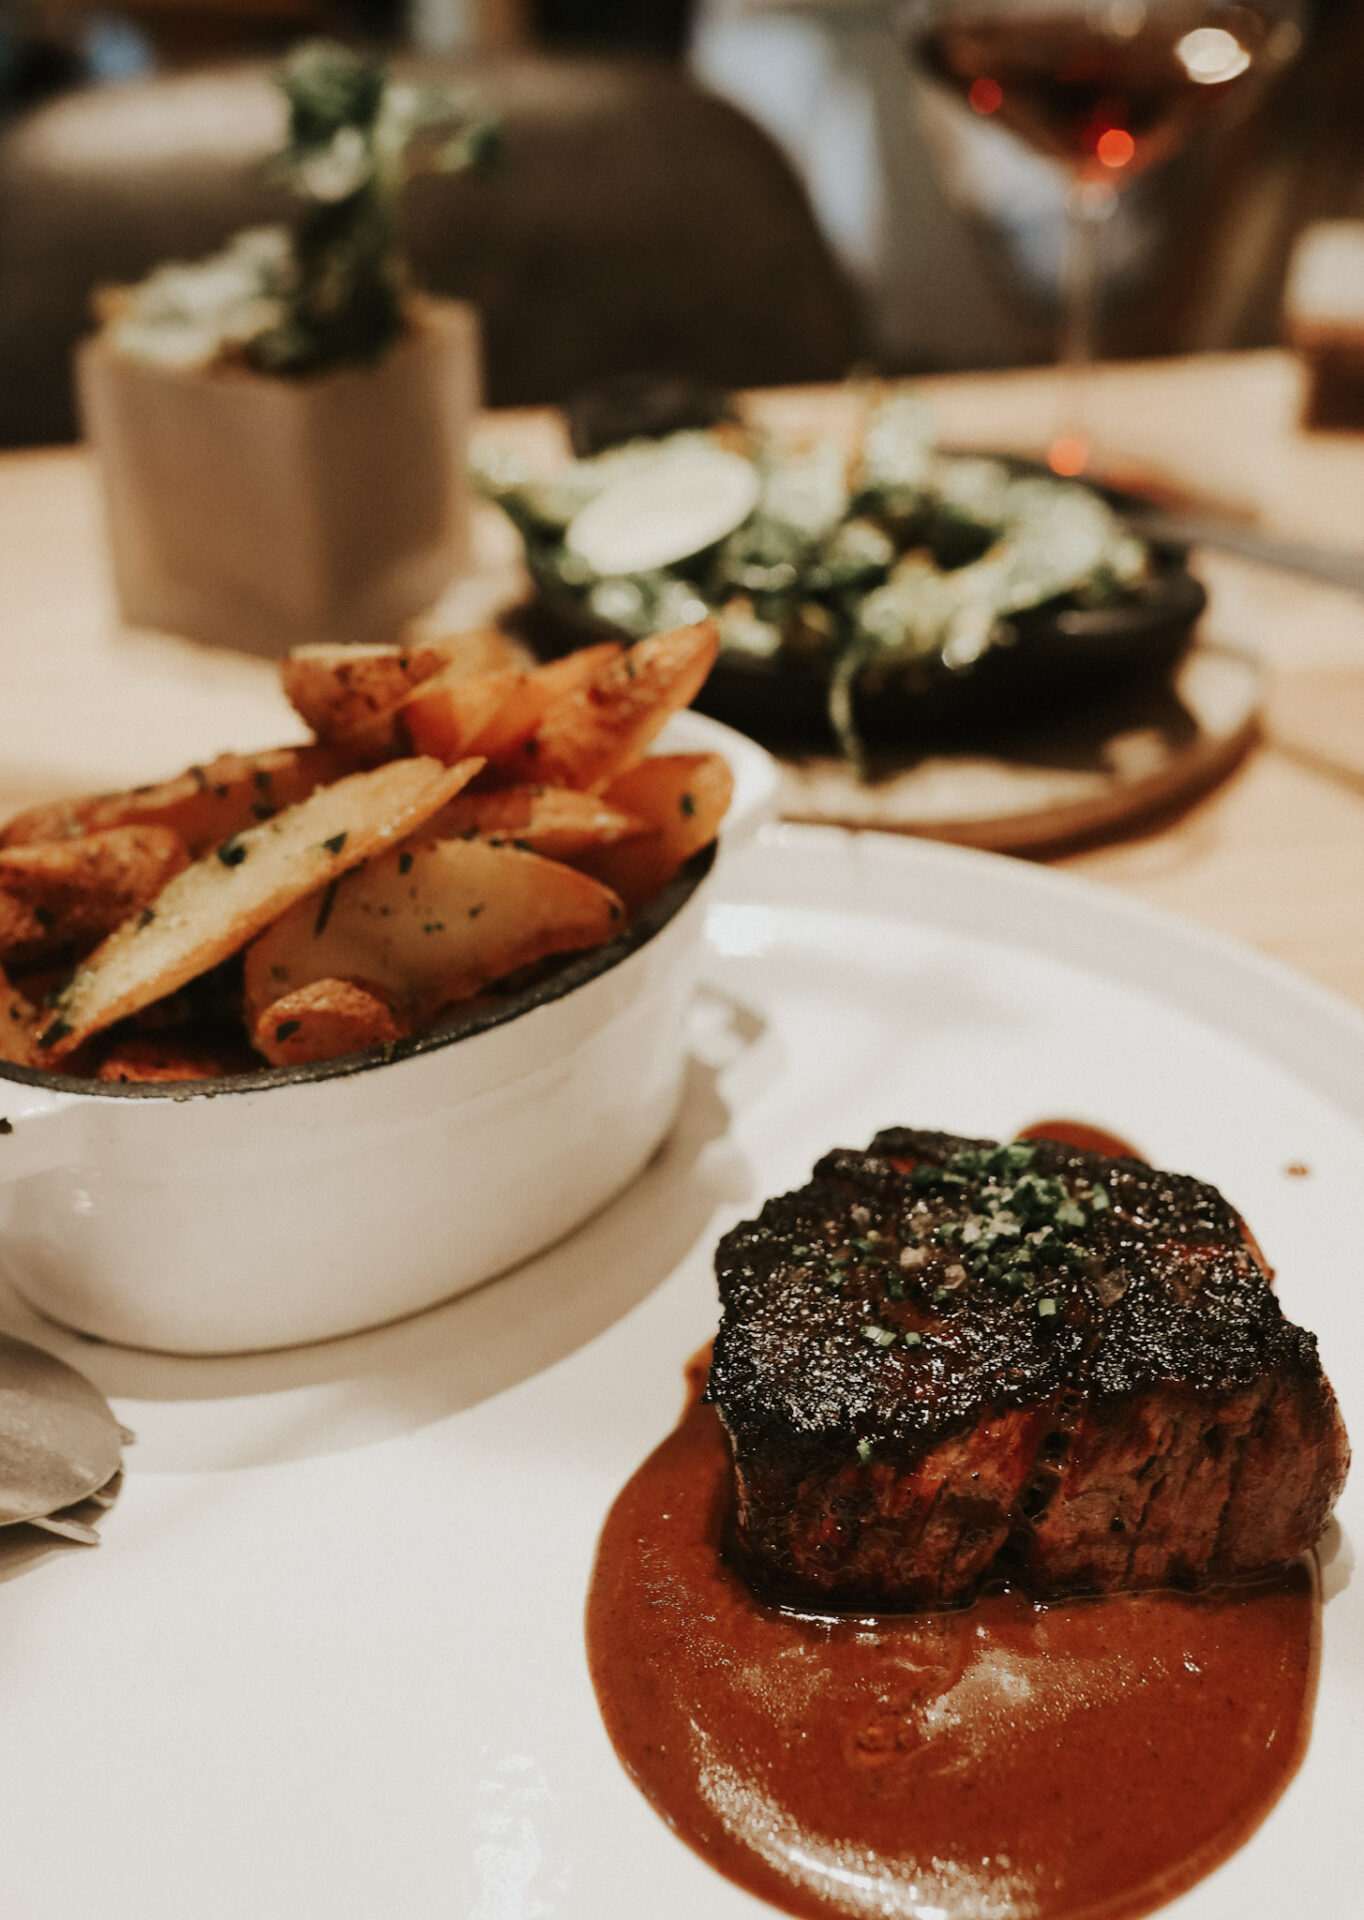 Steak & frites at downtown sonoma restaurant wit and wisdom